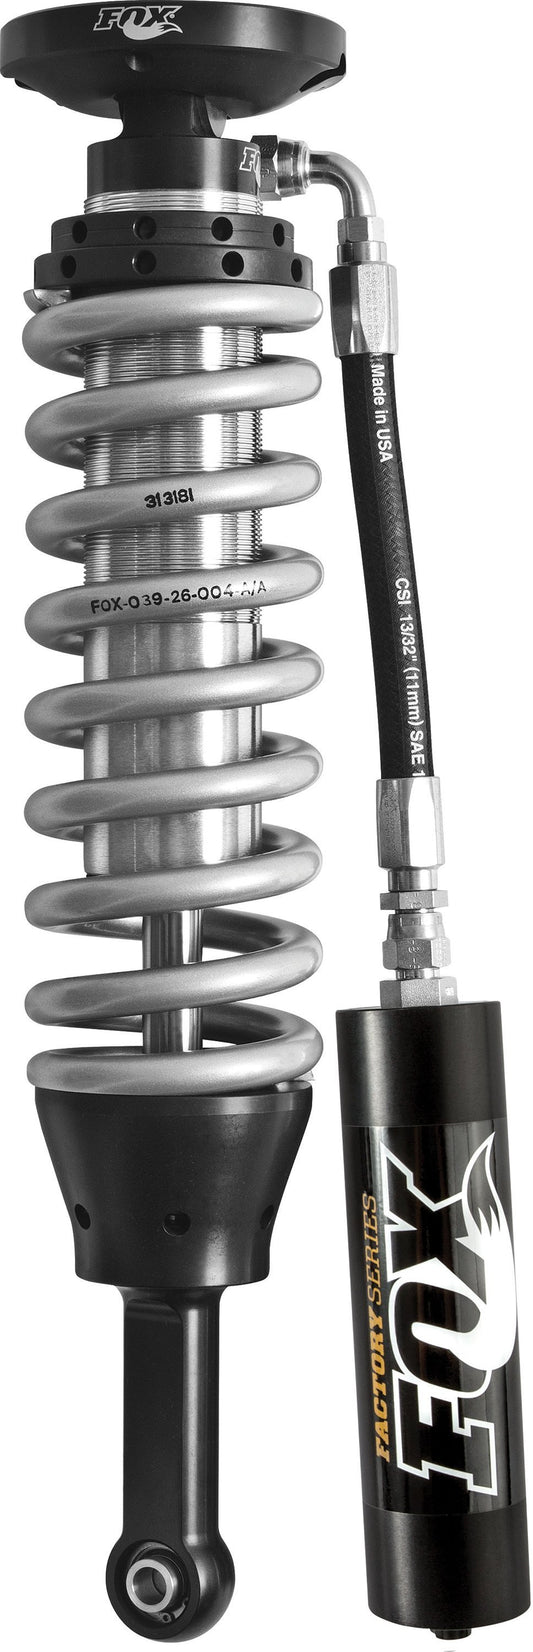 FACTORY RACE SERIES 2.5 COIL-OVER RESERVOIR SHOCK (PAIR) Lift: 4-6; Without Air Ride 2009-2010 Dodge Ram 1500 FOX-883-02-073 - 2.5 COIL-OVER SHOCKS - FOX Offroad Shocks - Texas Complete Truck Center